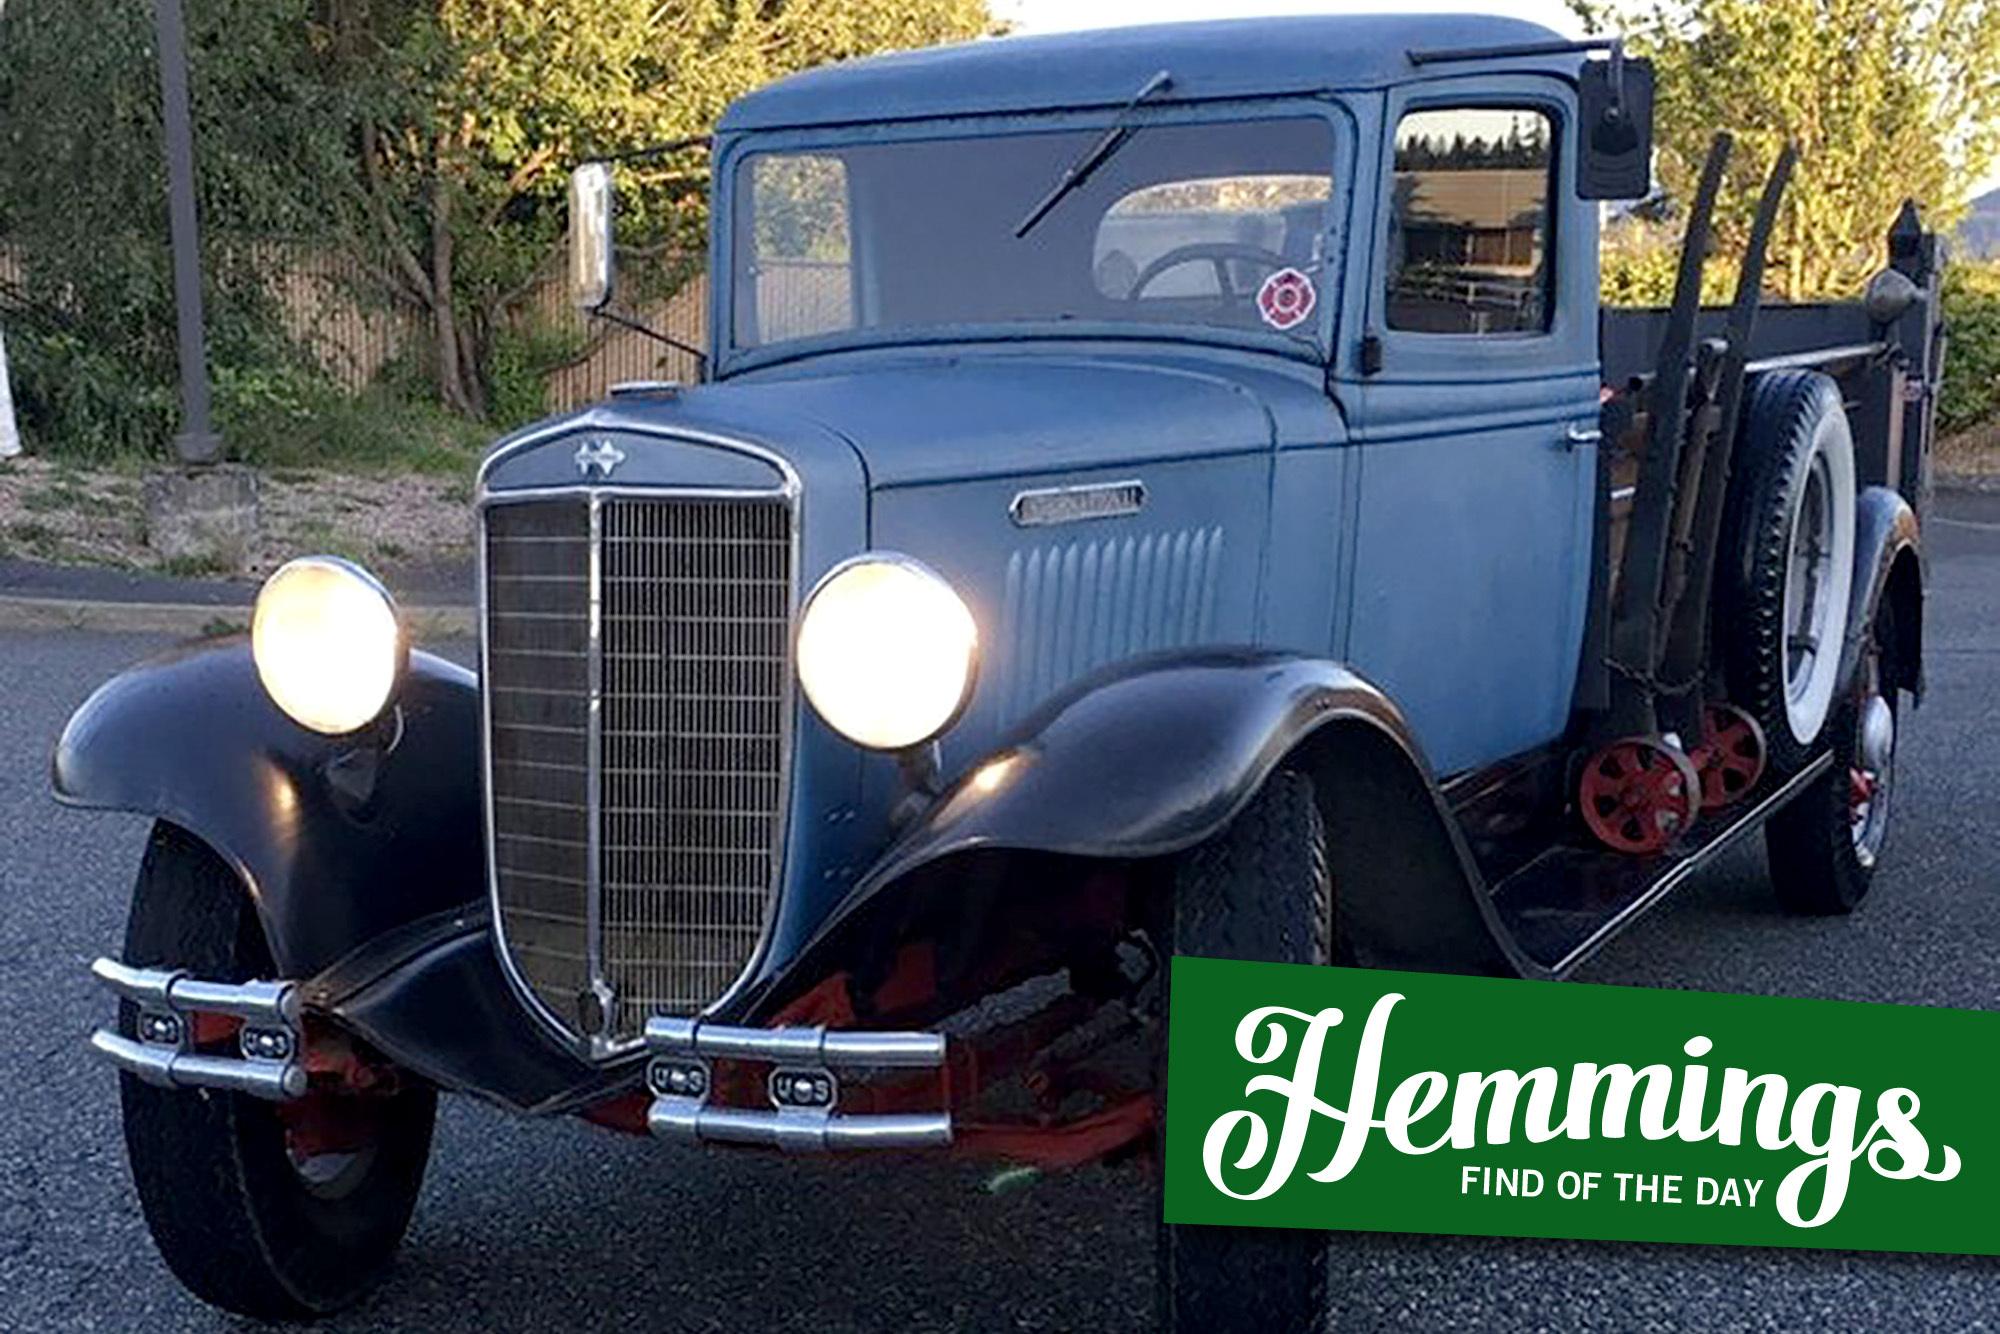 Built for work, low-mileage 1936 International C30 can still put in a full day of labor